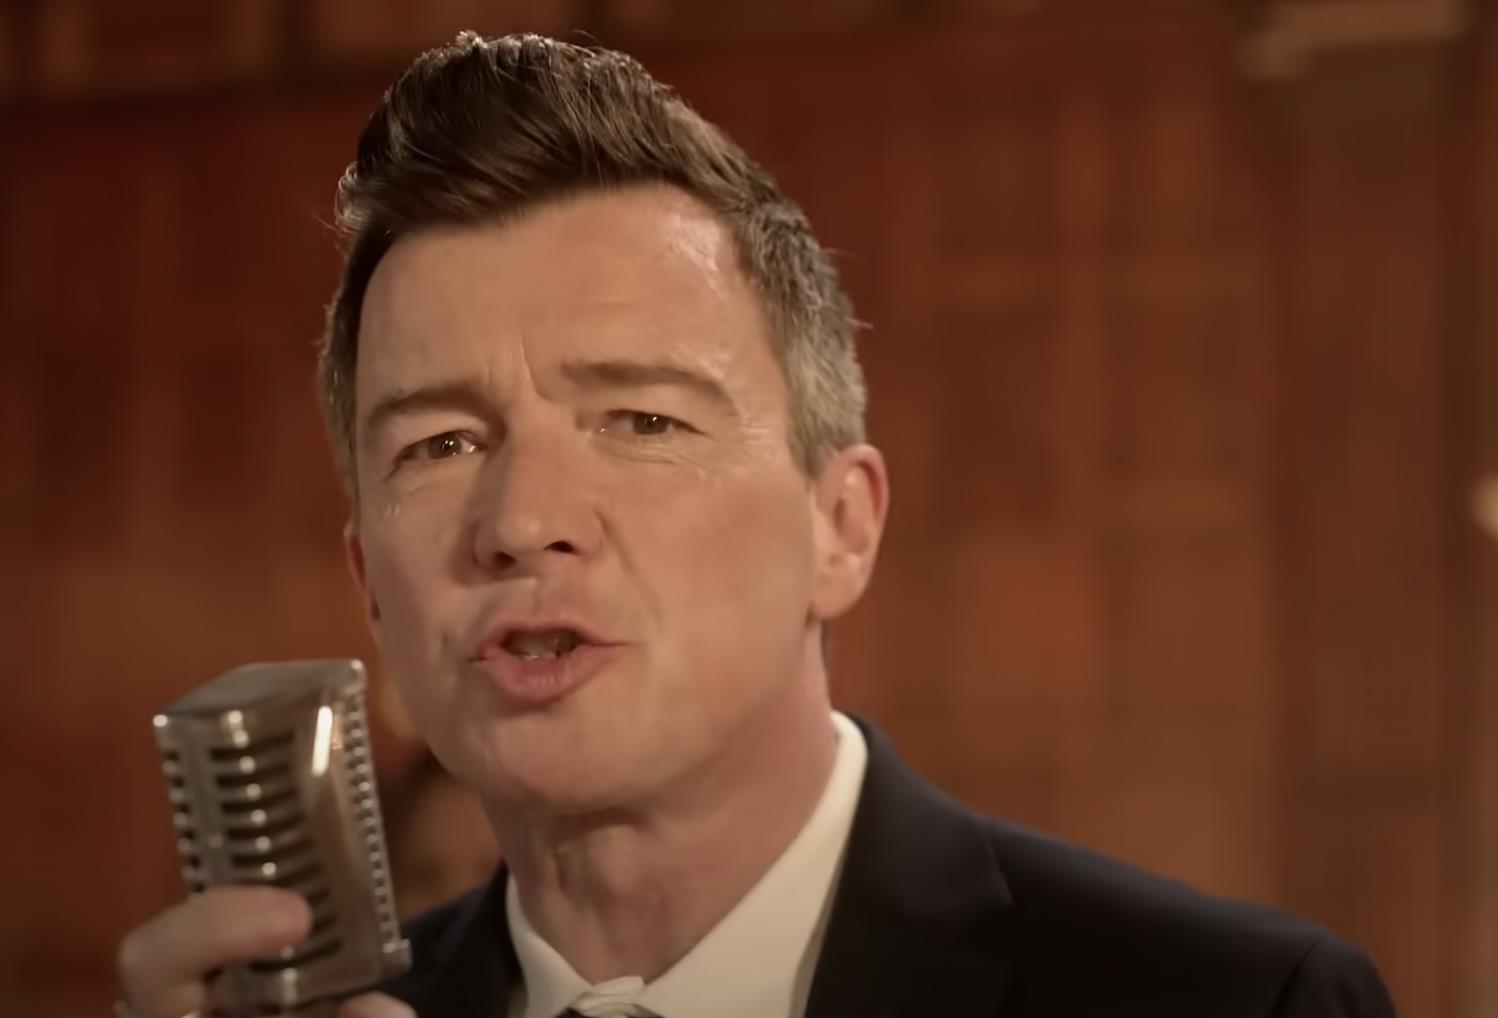 CSAA Insurance - Integrated Campaign - Rick Astley Never Gonna Give You Up